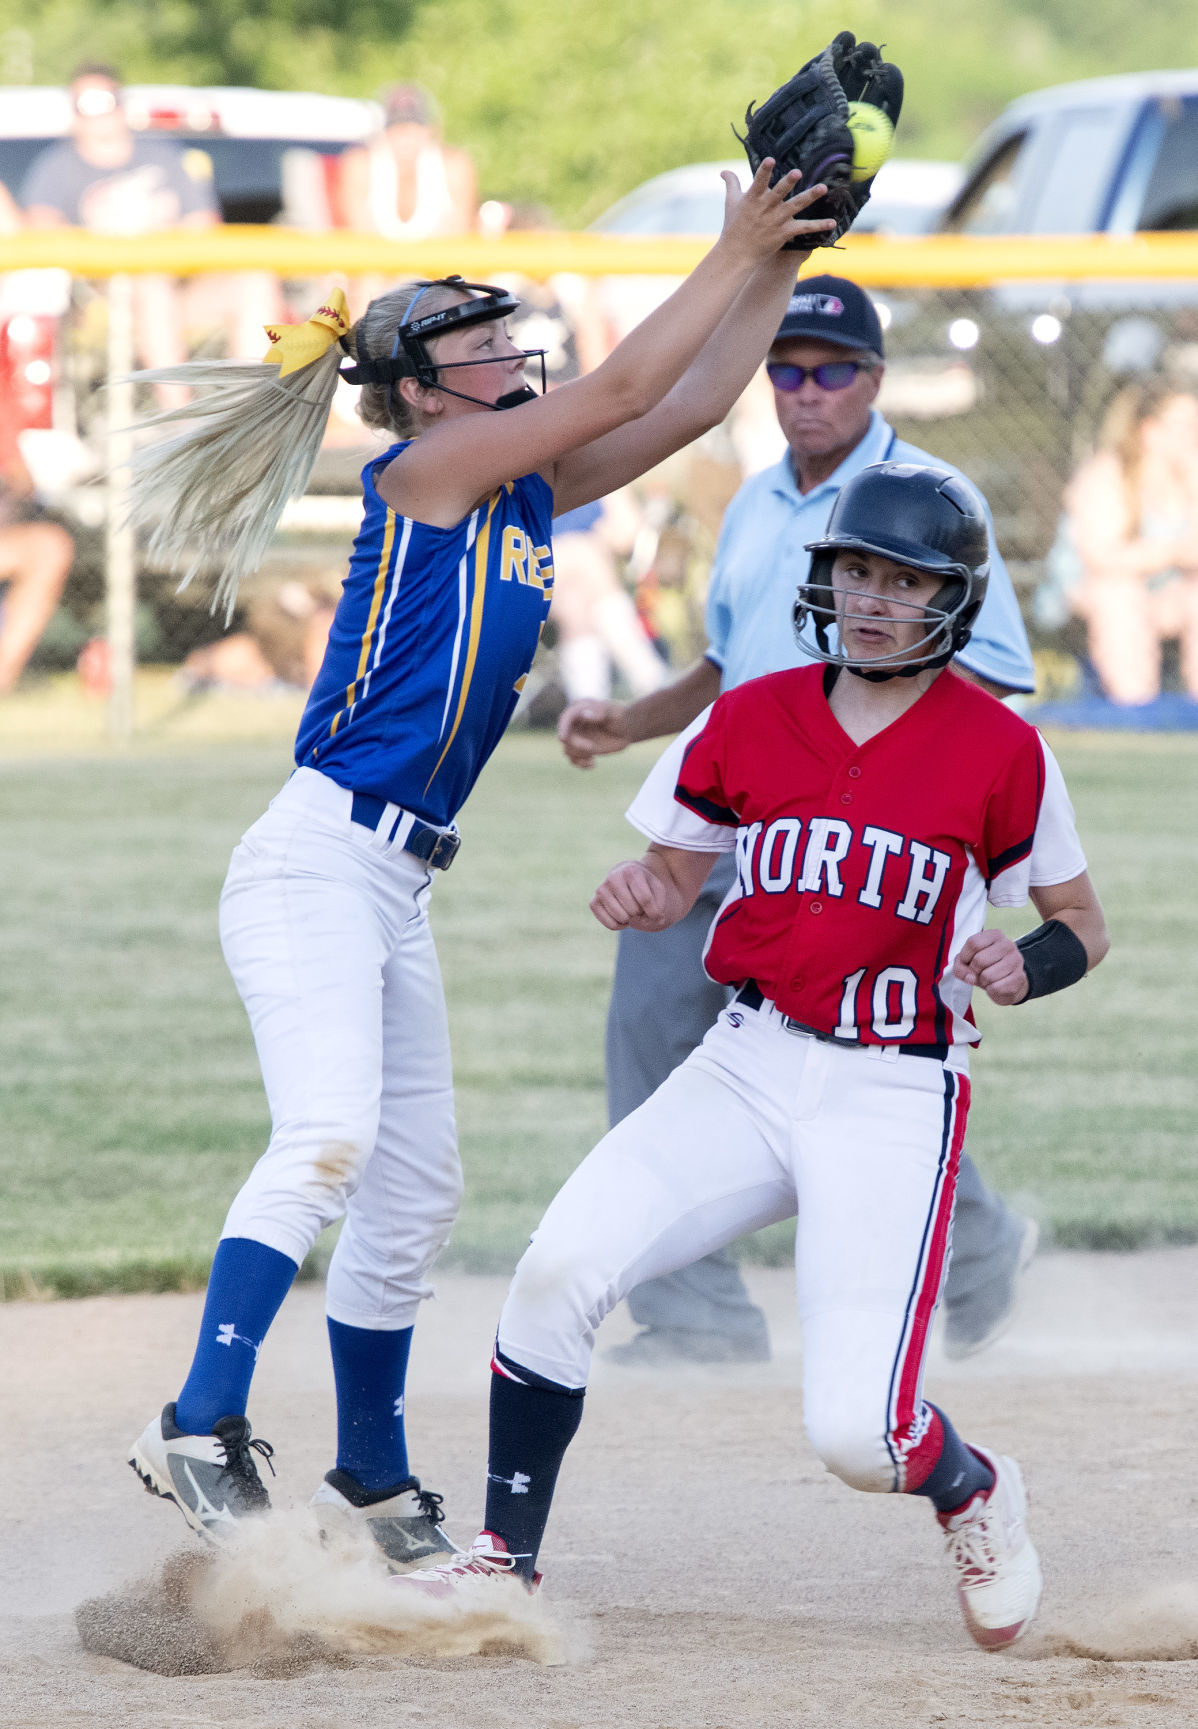 North softball starts off the season with 6-1 win over Westwood | High